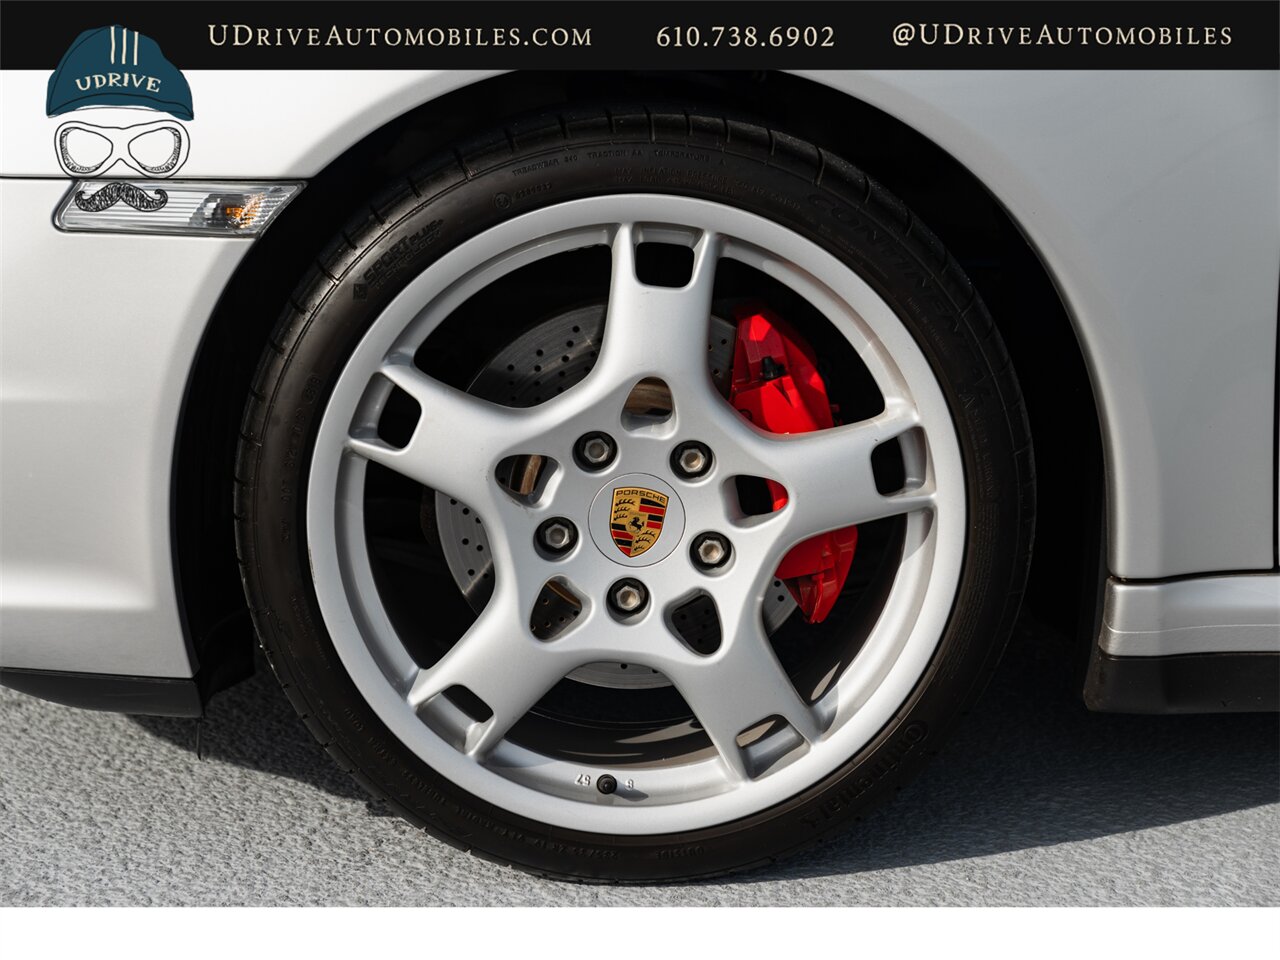 2006 Porsche 911 Carrera 4S  997 C4S 6 Speed Manual Service History - Photo 56 - West Chester, PA 19382